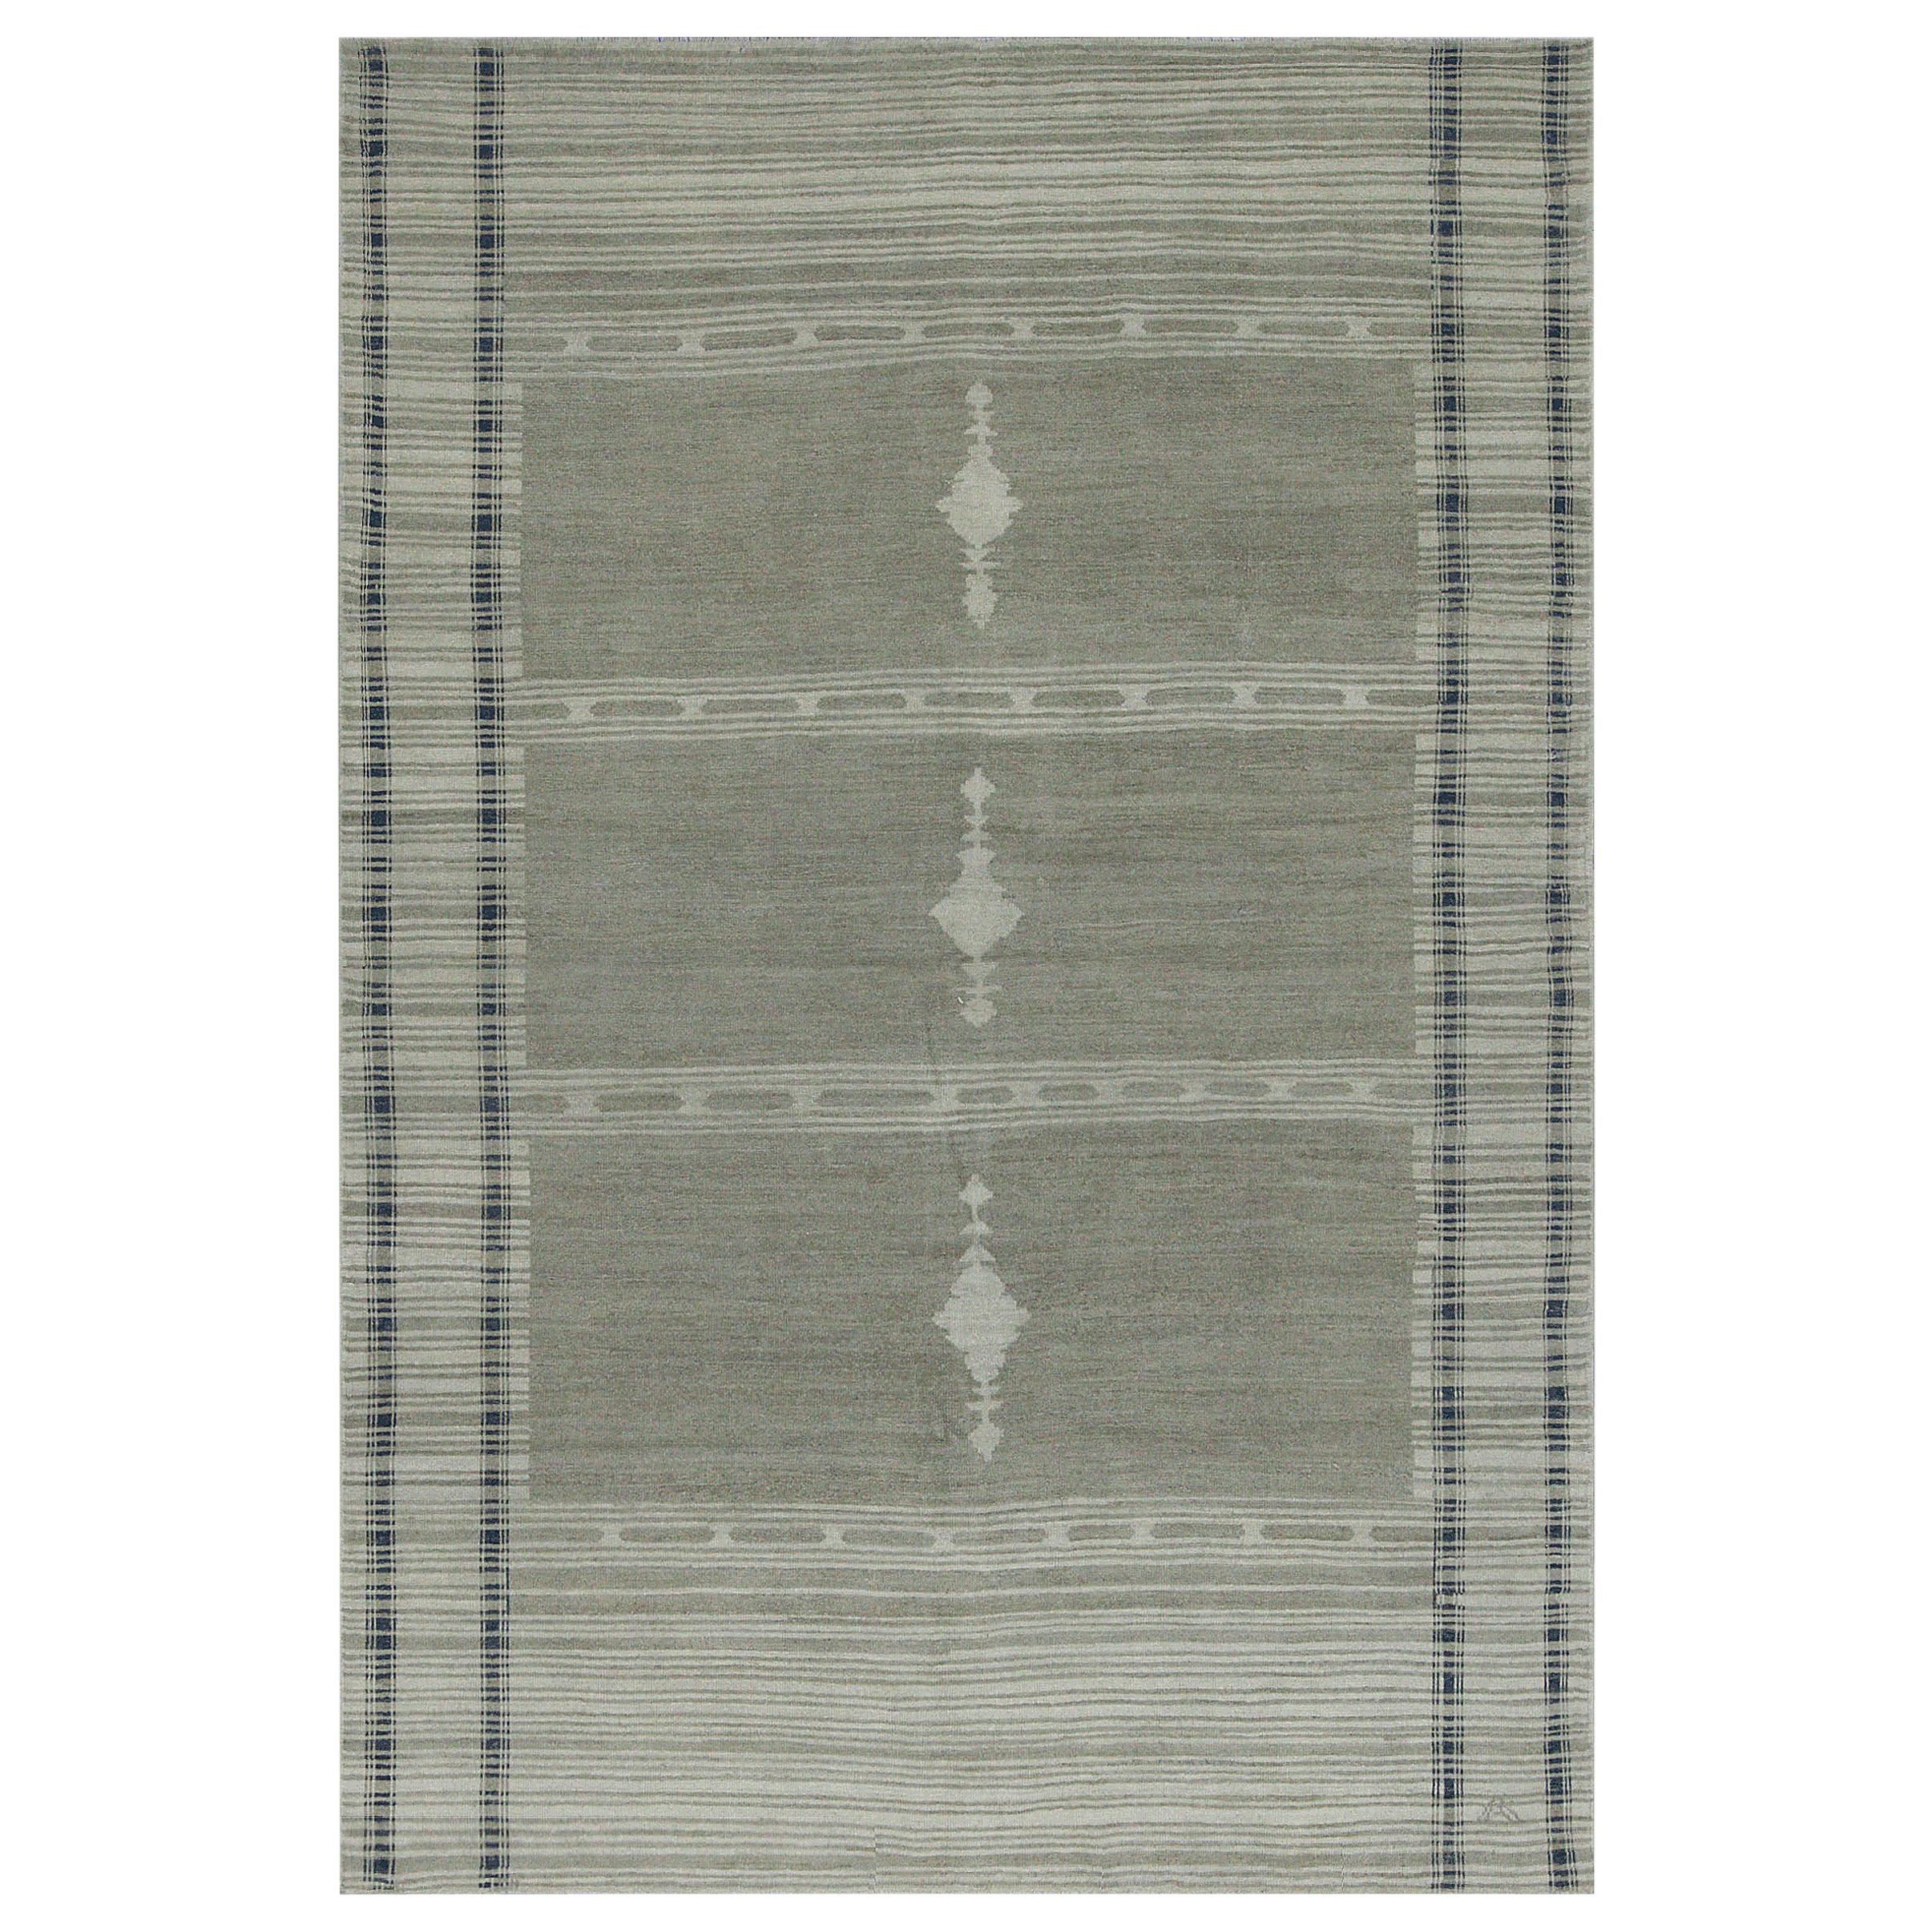 Contemporary Oushak Rug with Black and Beige Stripes on Gray Field